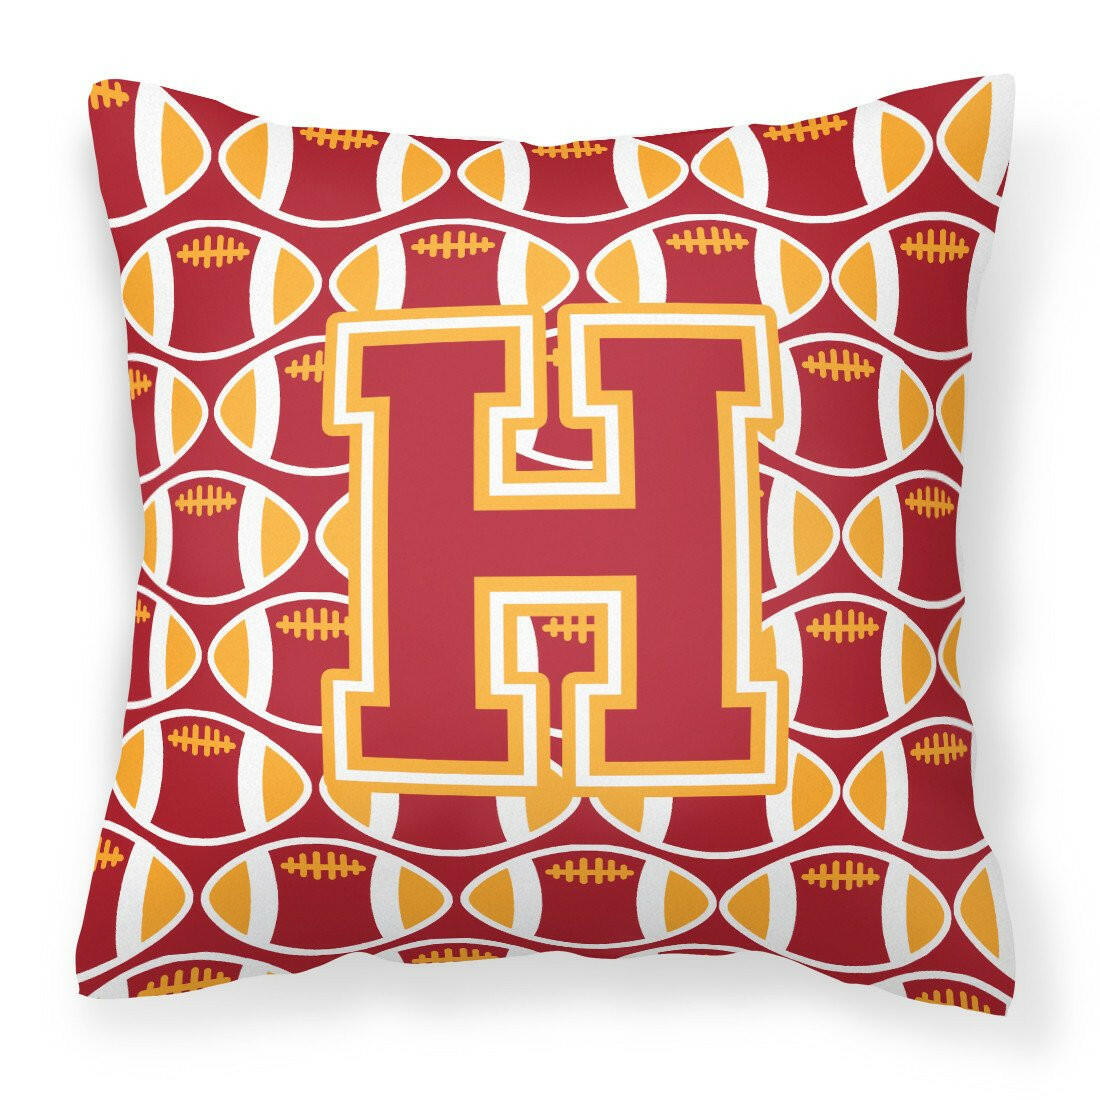 Letter H Football Cardinal and Gold Fabric Decorative Pillow CJ1070-HPW1414 by Caroline's Treasures